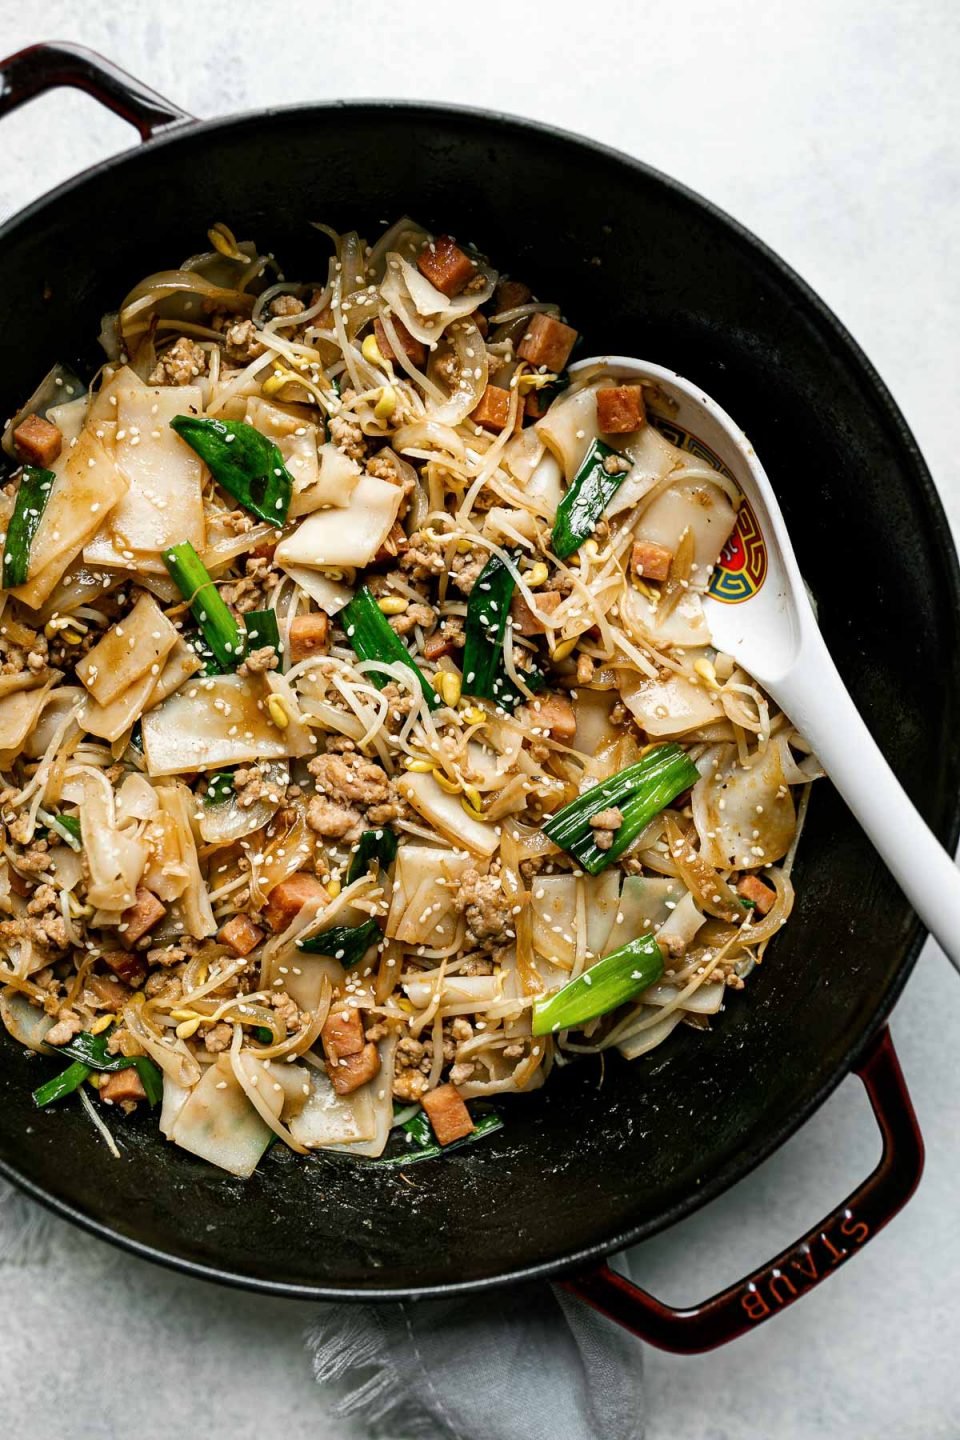 Top down photo of Hawaiian-style pork chow fun in a grenadine colored Staub cast iron wok. The wok sits on a light blue surface with a light blue linen napkin tucked underneath. The chow fun is garnished with sesame seeds and there is a Chinese spoon resting in the dish.